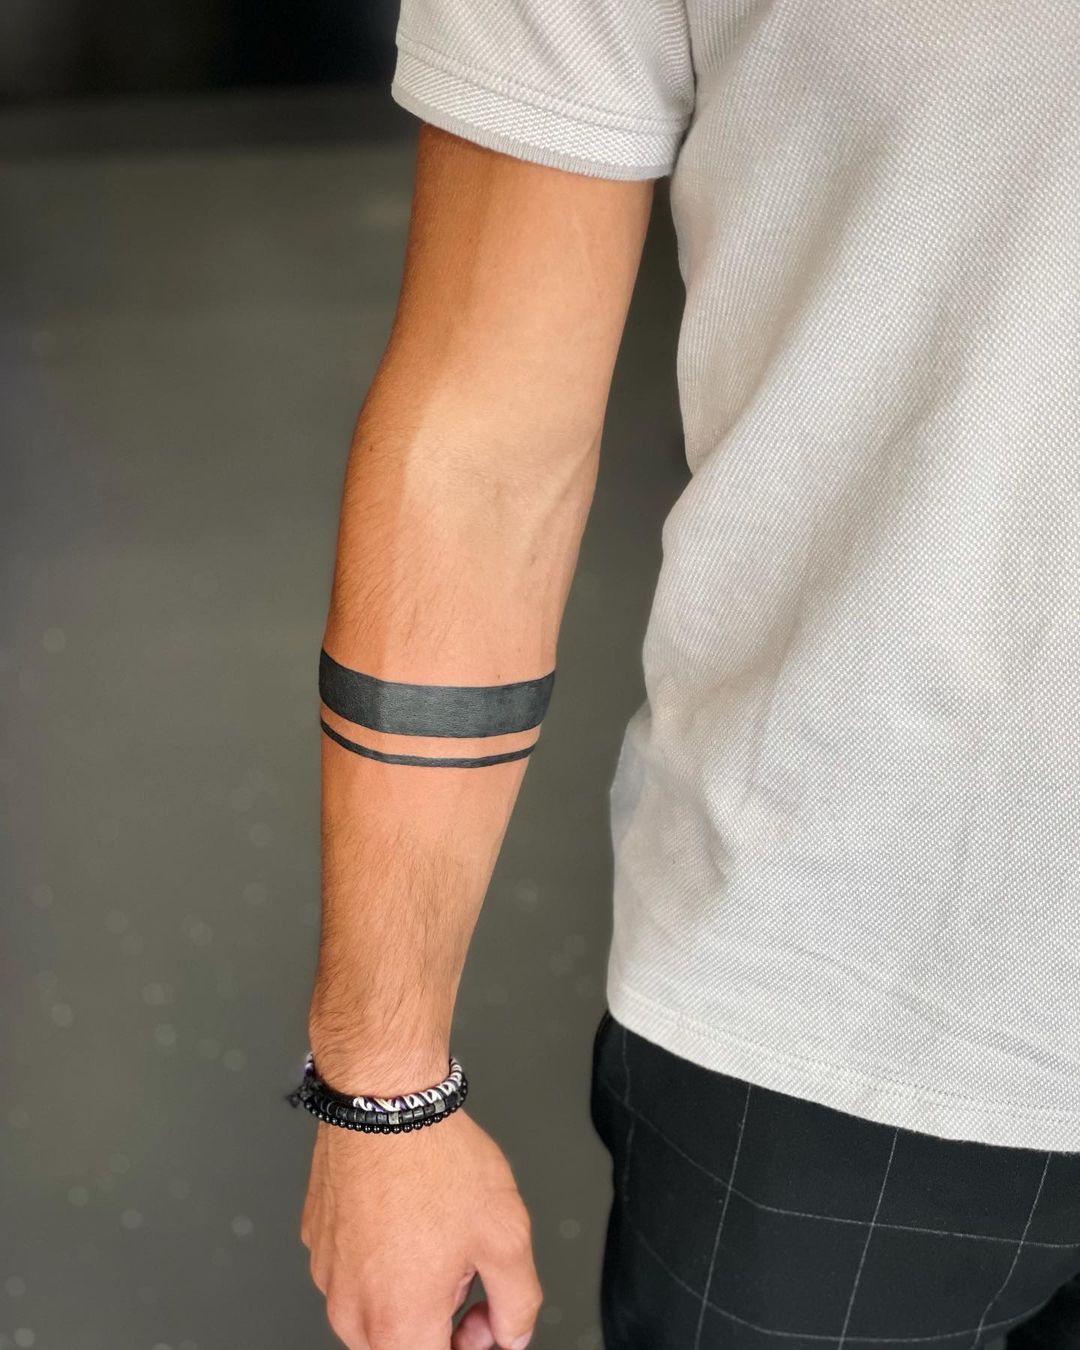 Who-or-what-is-the-inspiration-for-the-Solid-Black-Armband-Tattoo